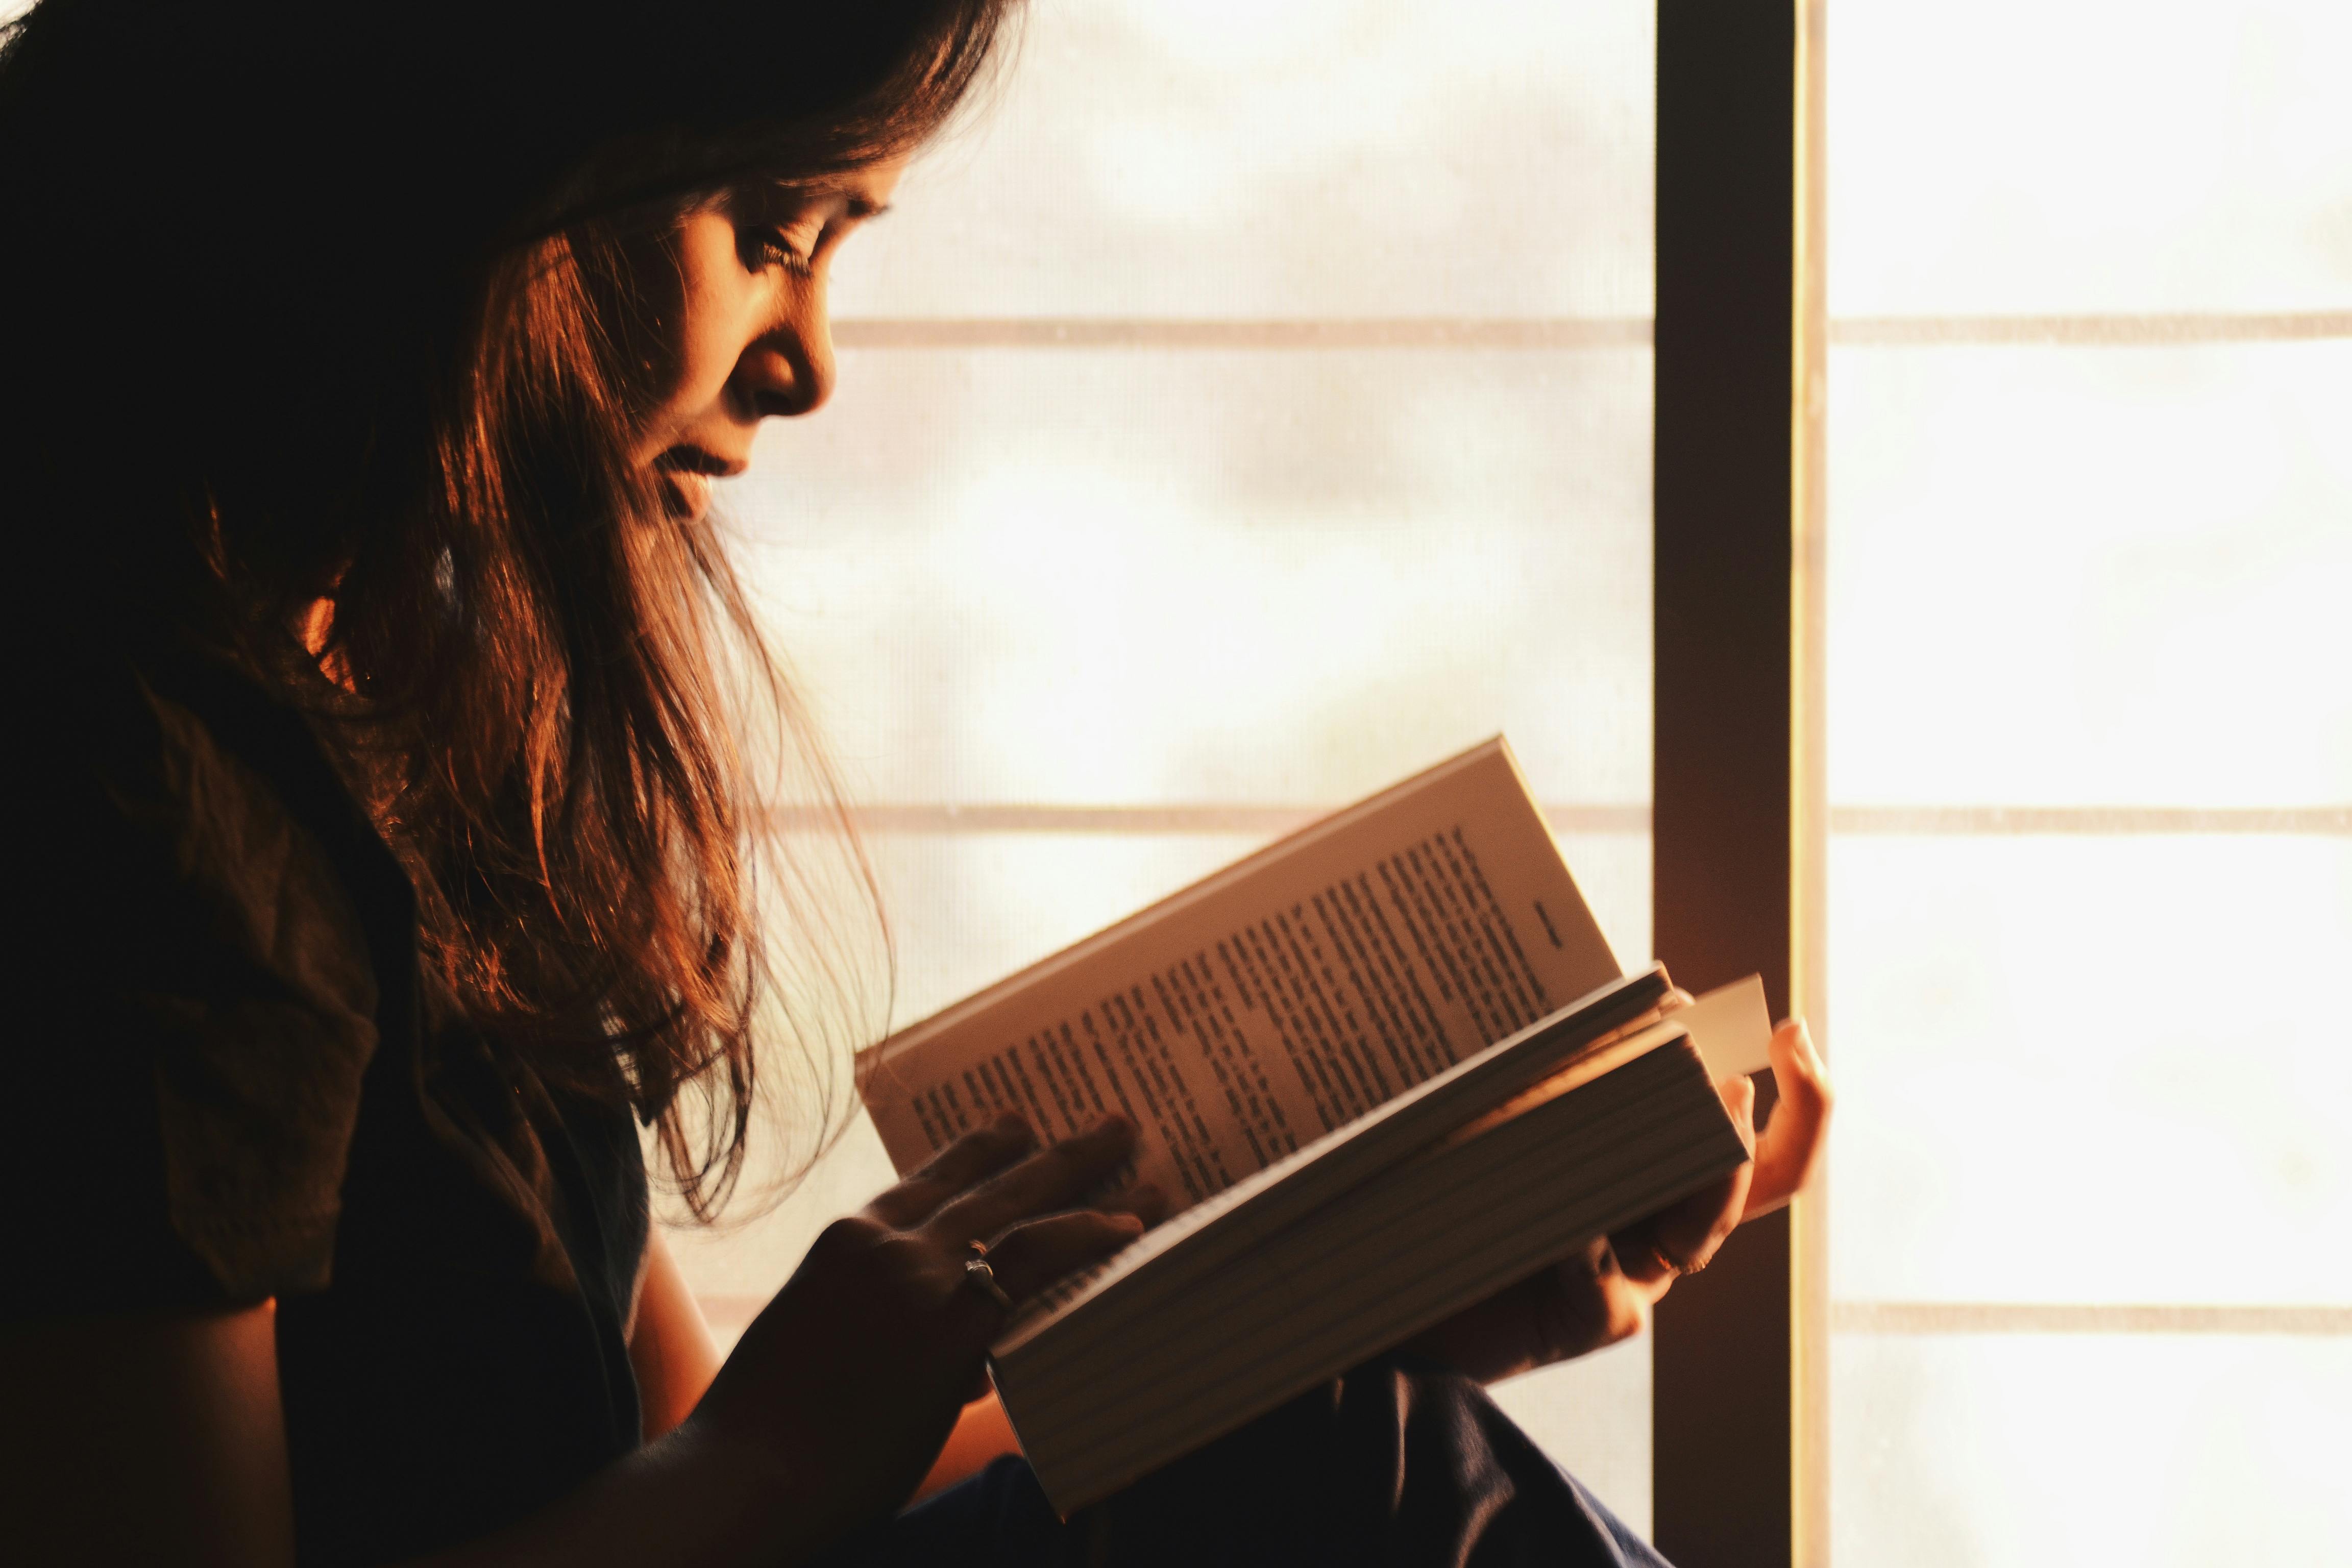 A young woman reading a book | Source: Rahul Shah on Pexels